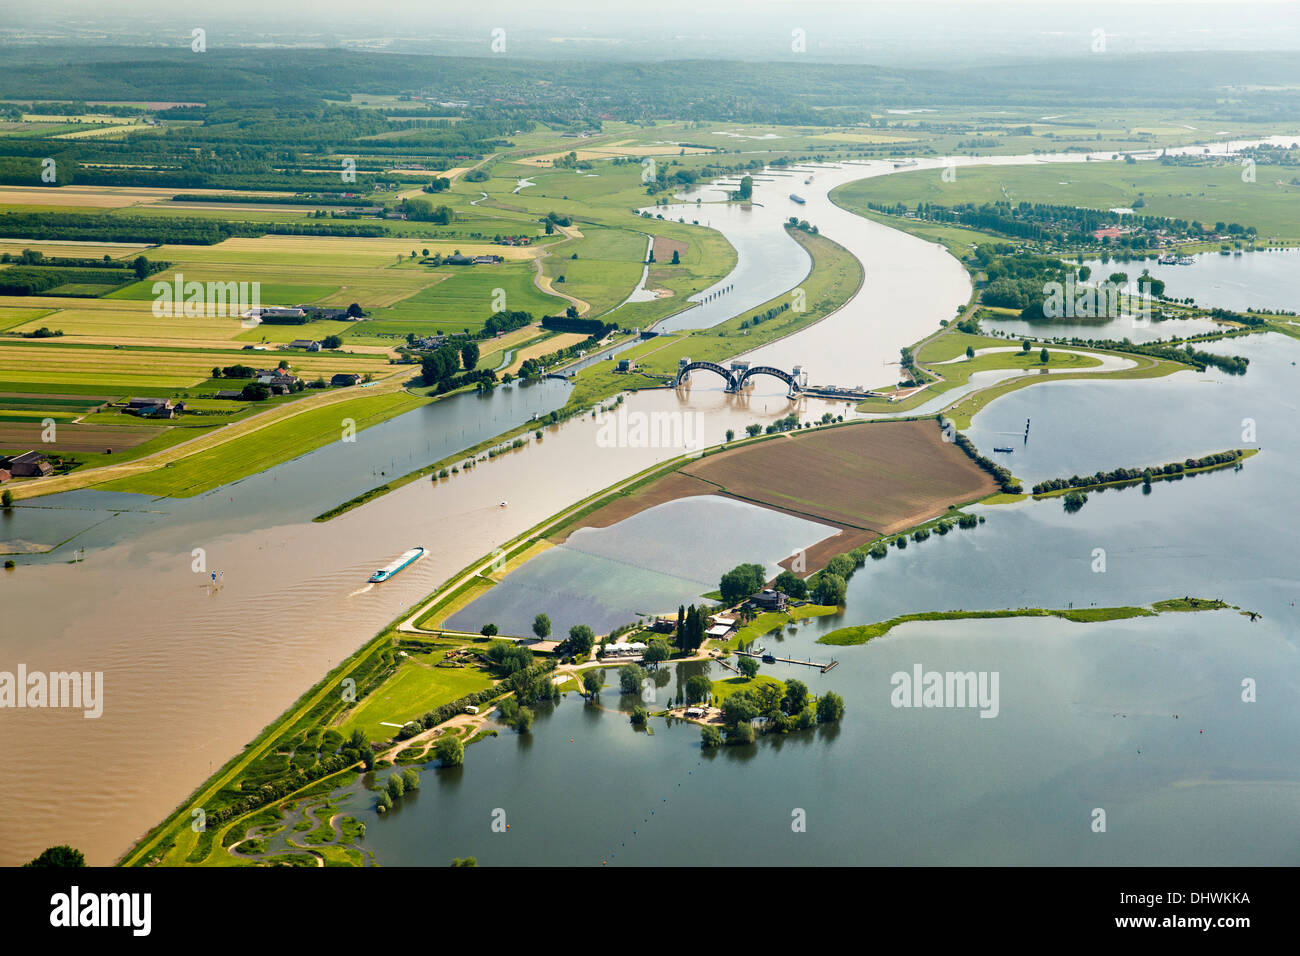 Netherlands, Amerongen. Weir and lock complex in Nederrijn river. Cargo boat. Flooded flood plains. Aerial Stock Photo